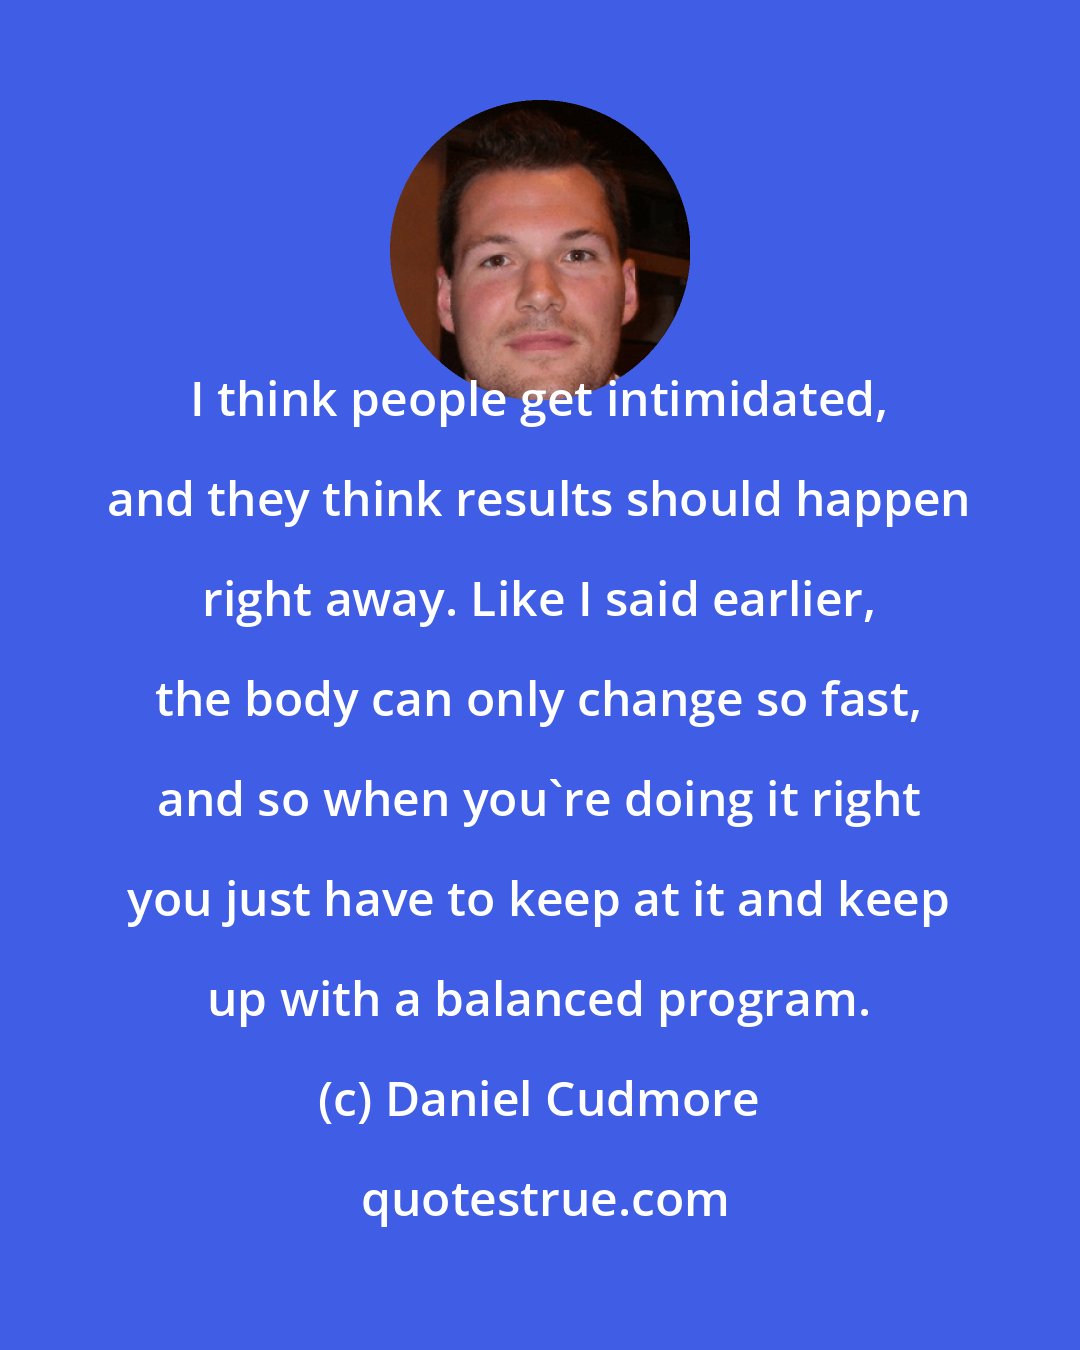 Daniel Cudmore: I think people get intimidated, and they think results should happen right away. Like I said earlier, the body can only change so fast, and so when you're doing it right you just have to keep at it and keep up with a balanced program.